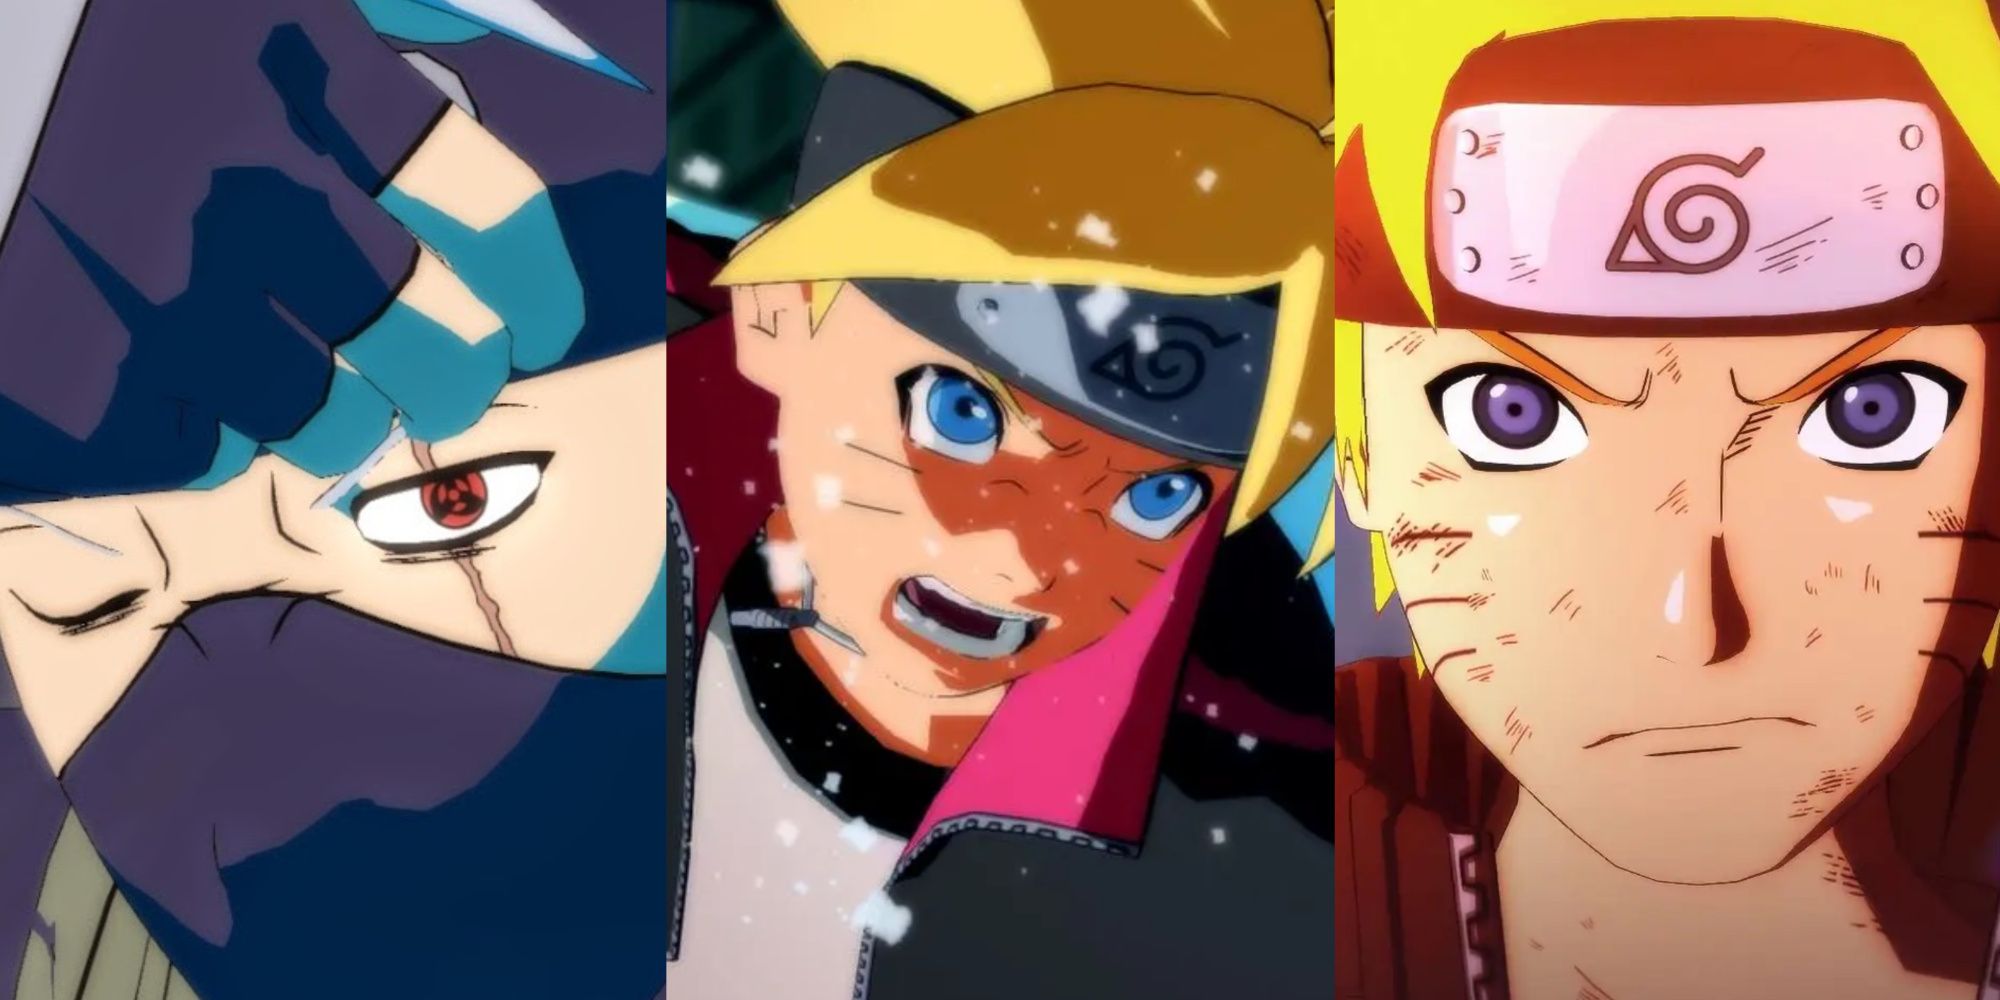 A collage showing the faces of Kakashi, Boruto, and Naruto.